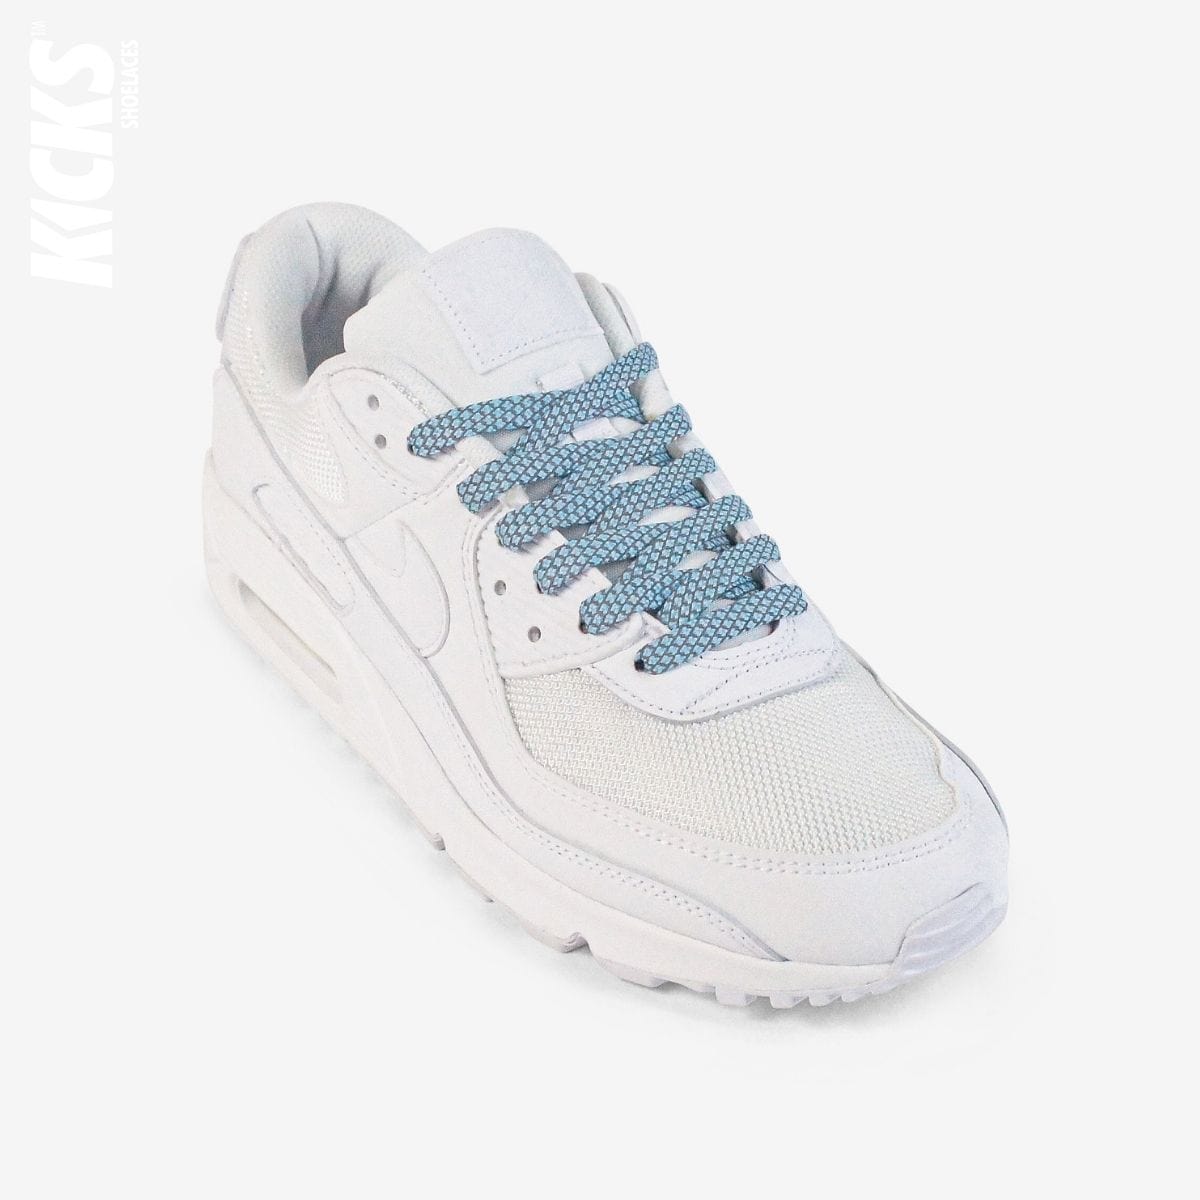 pastel-blue-reflective-colored-shoelaces-on-white-sneakers